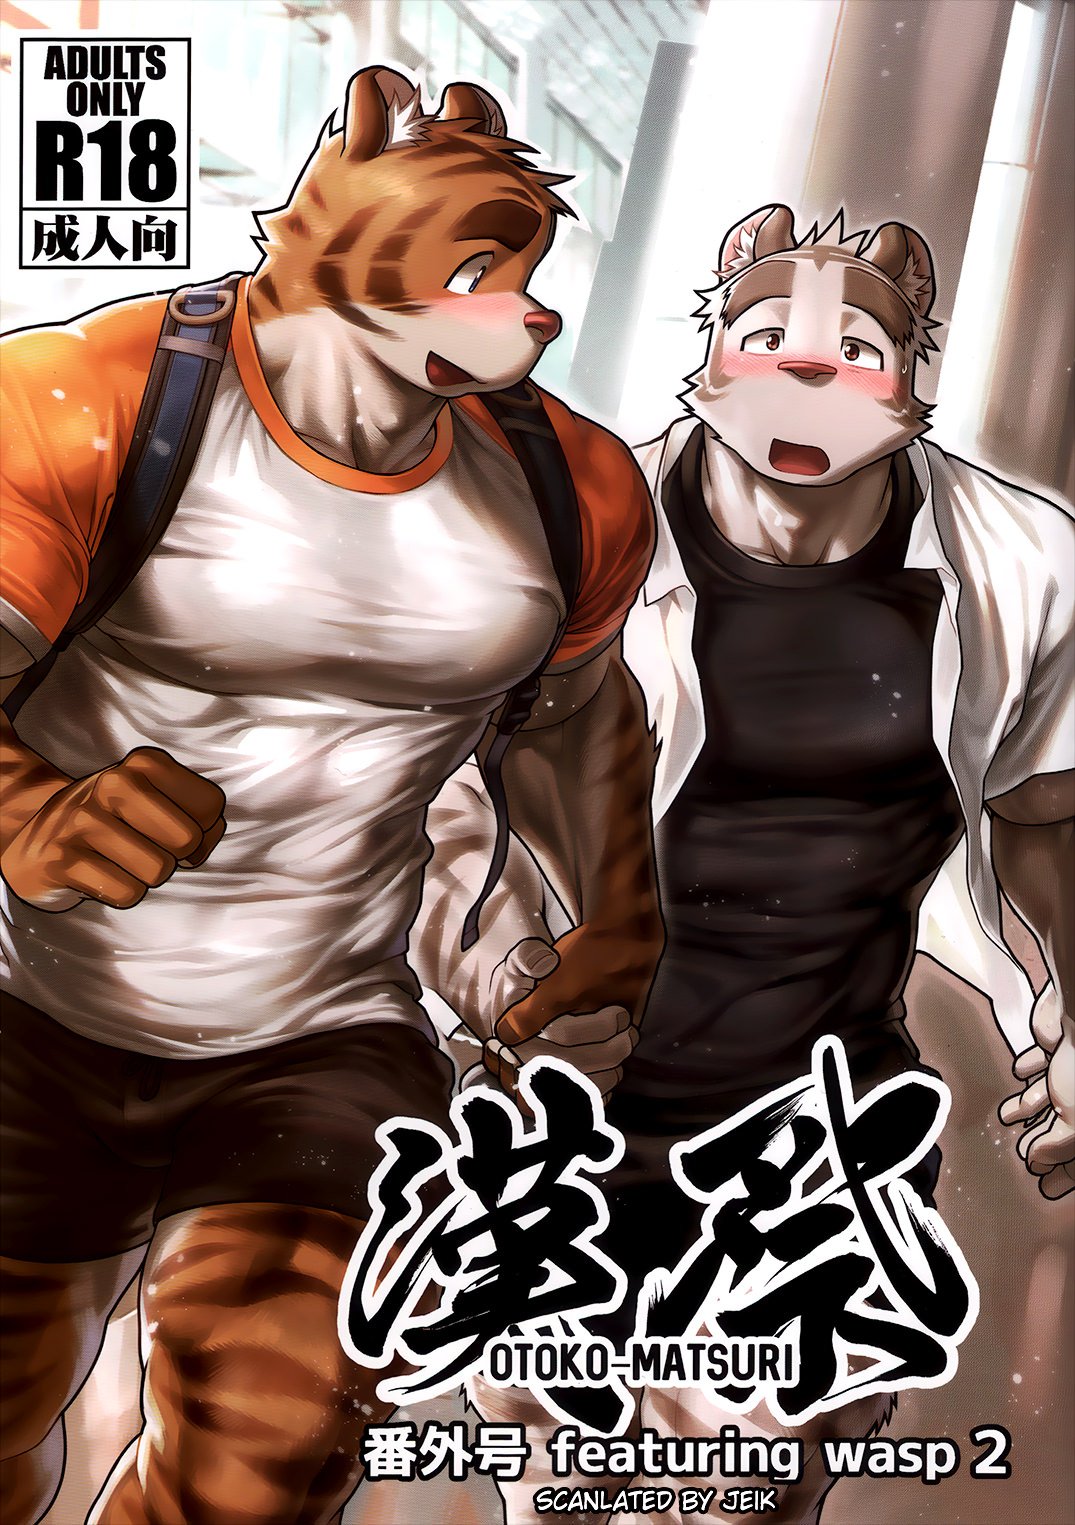 gay furry porn comic about students at boarding school